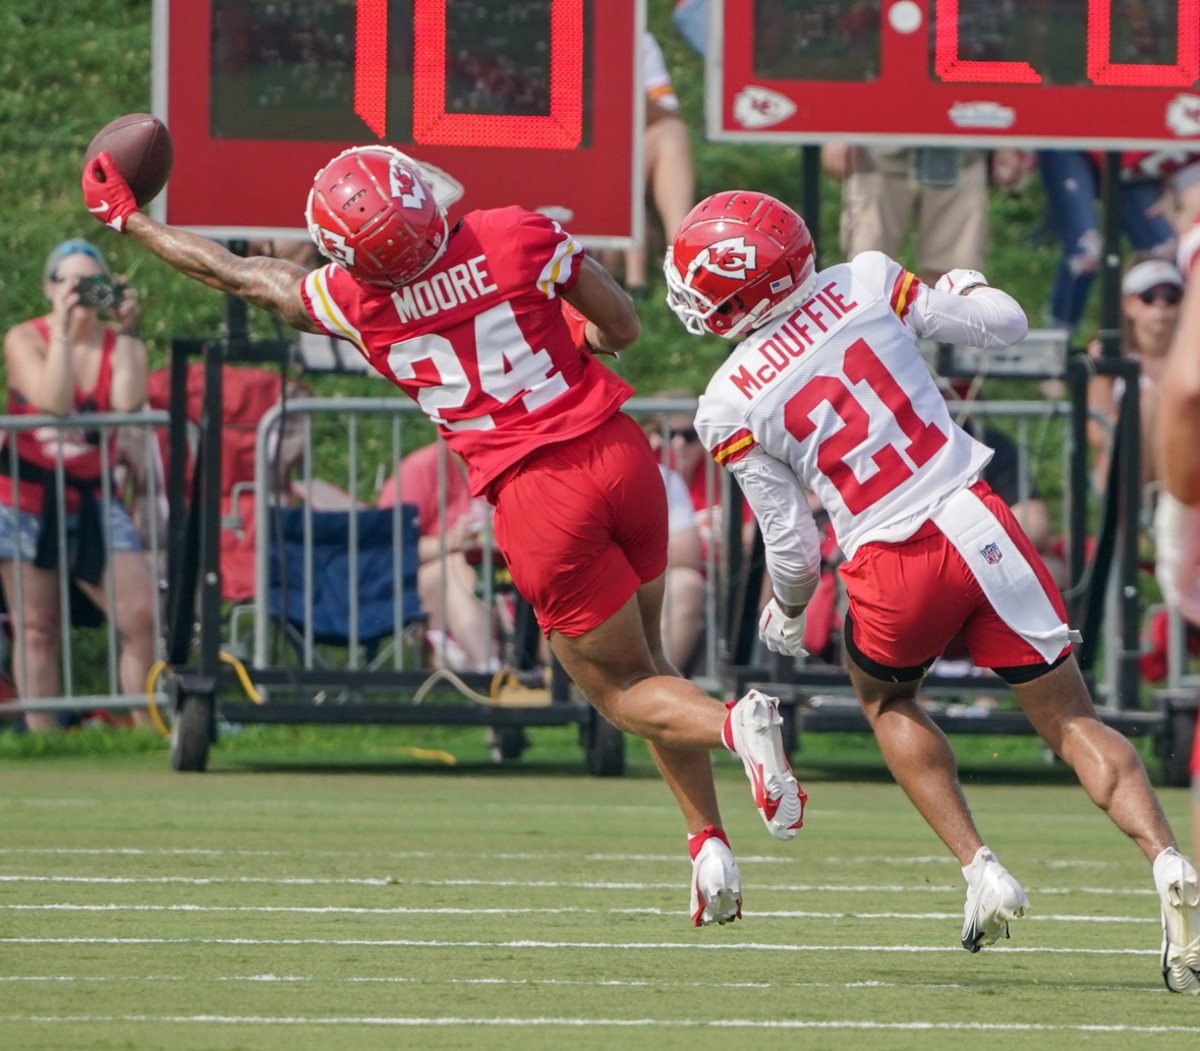 Jul 27, 2022; St. Joseph, MO, USA; Kansas City Chiefs wide receiver Skyy Moore (24) attempts a one handed catch as cornerback Trent McDuffie (21) defends during training camp at Missouri Western State University. Mandatory Credit: Denny Medley-USA TODAY Sports